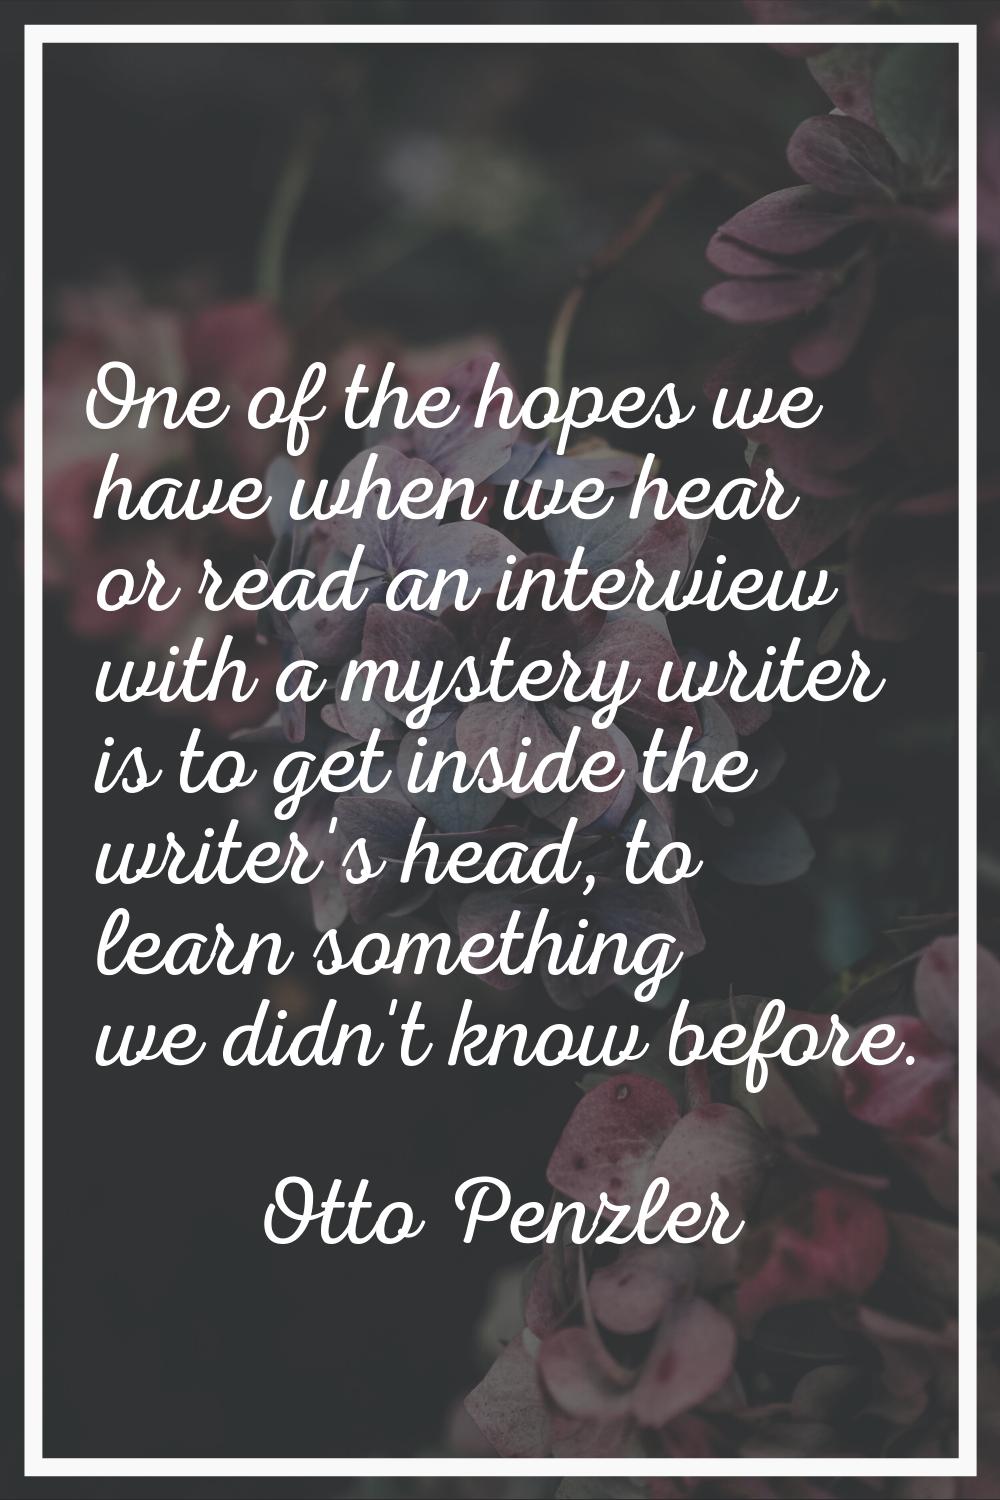 One of the hopes we have when we hear or read an interview with a mystery writer is to get inside t